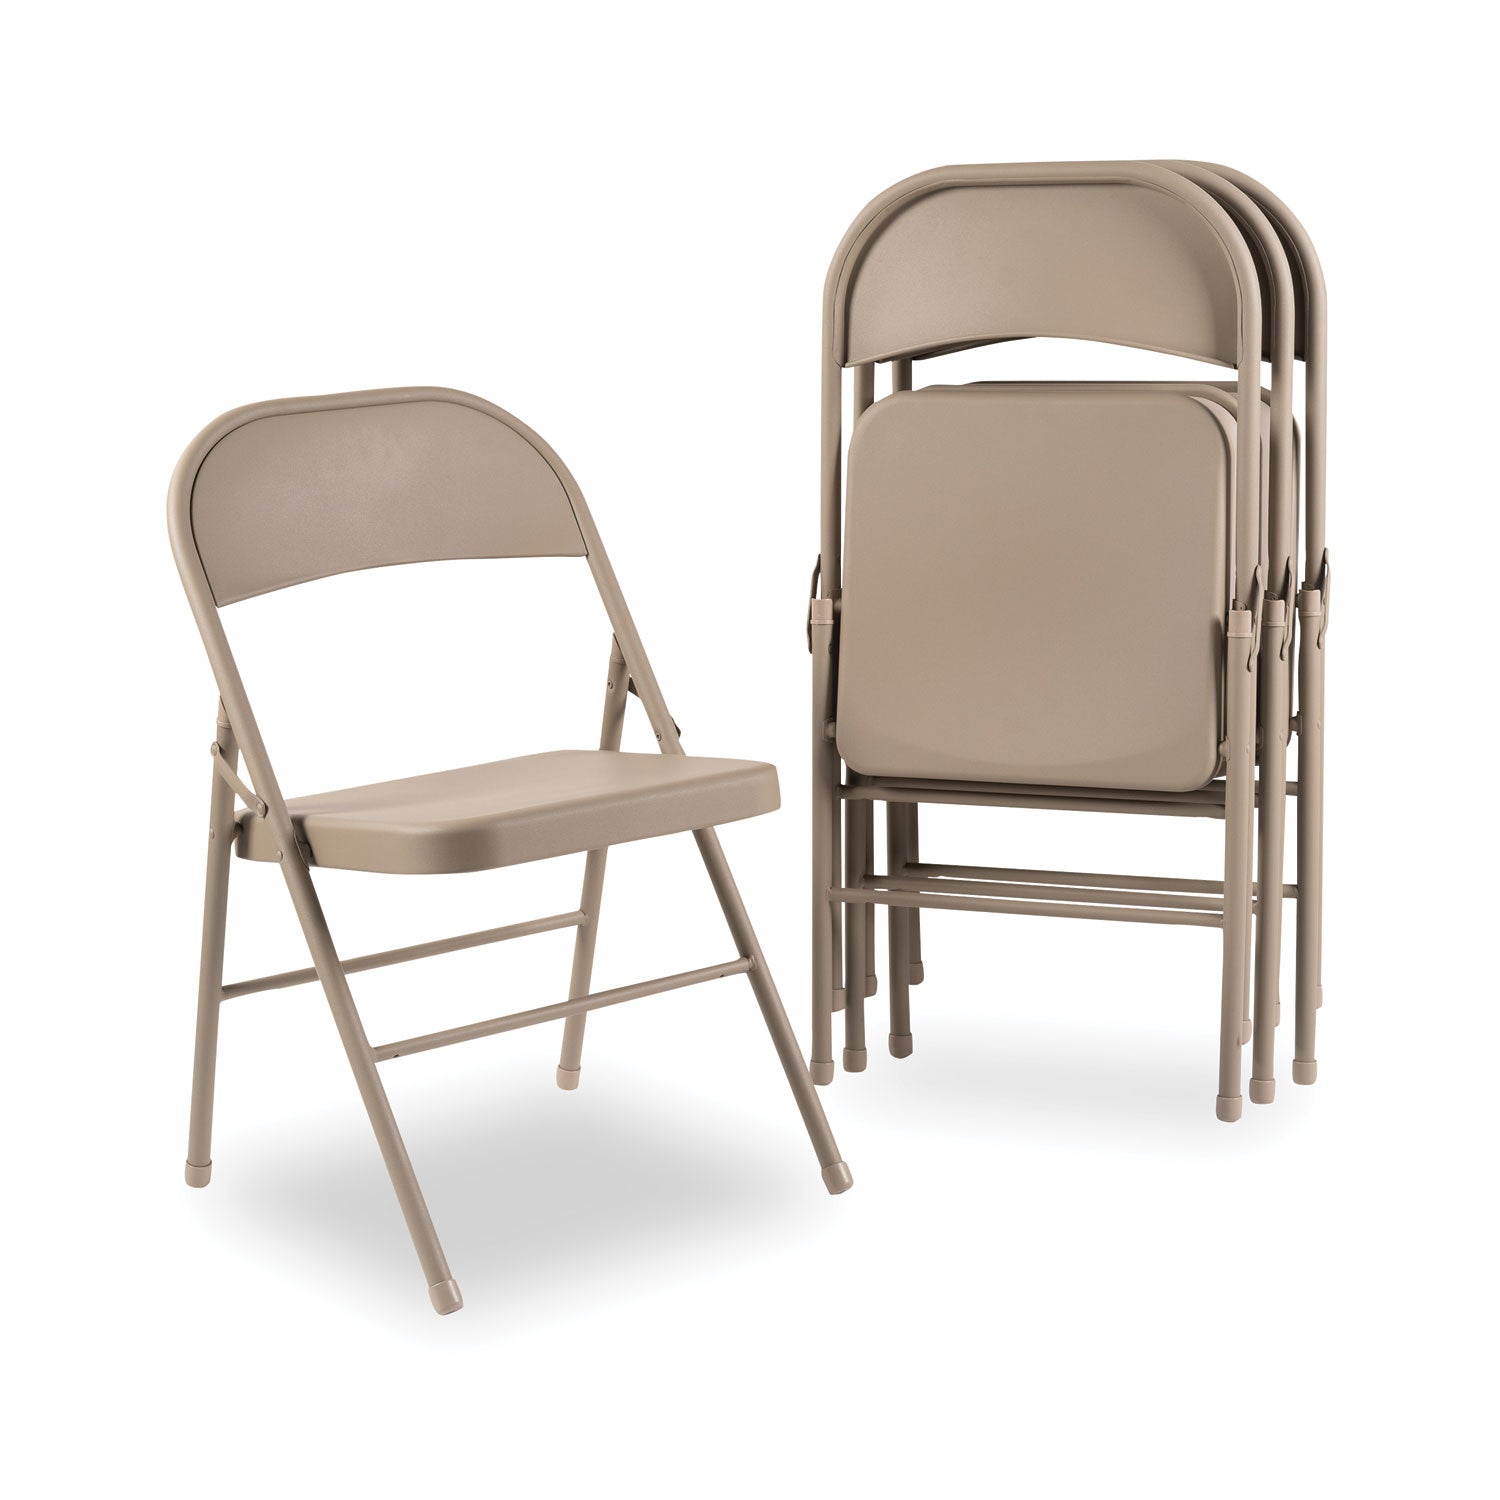 all-steel-folding-chair-supports-up-to-300-lb-165-seat-height-tan-seat-tan-back-tan-base-4-carton_alefcmt4t - 7